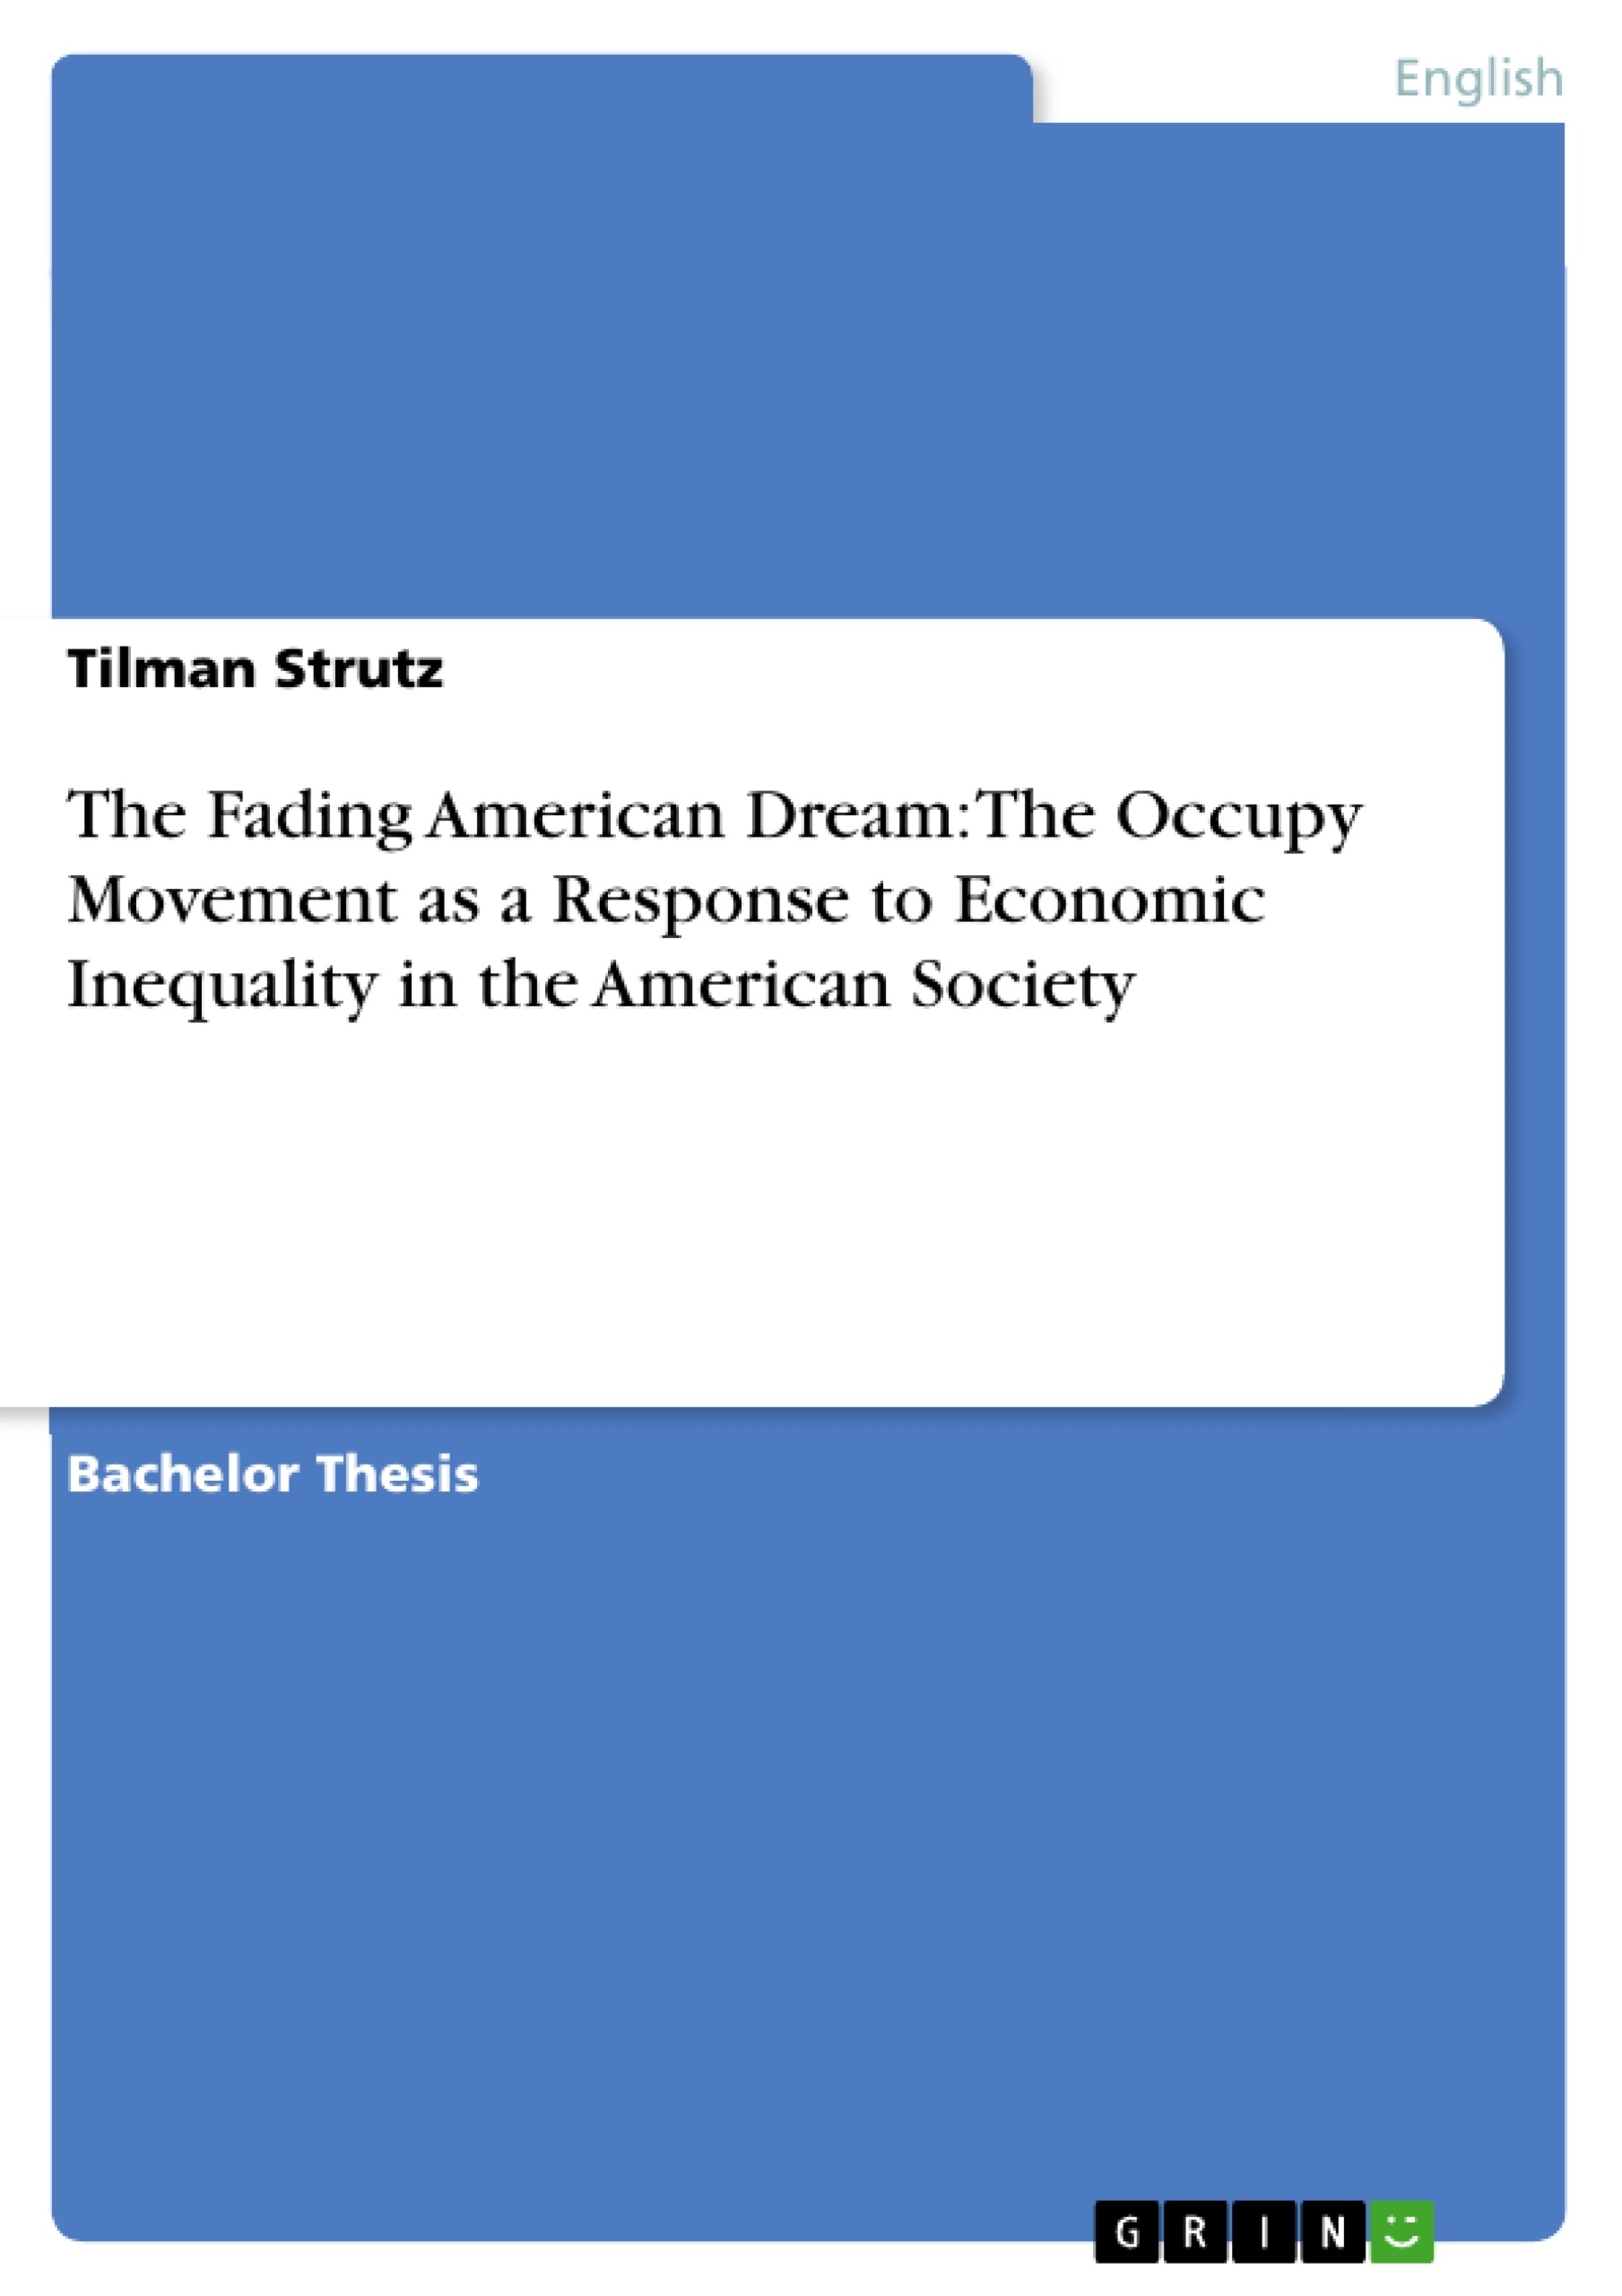 Title: The Fading American Dream: The Occupy Movement as a Response to Economic Inequality in the American Society